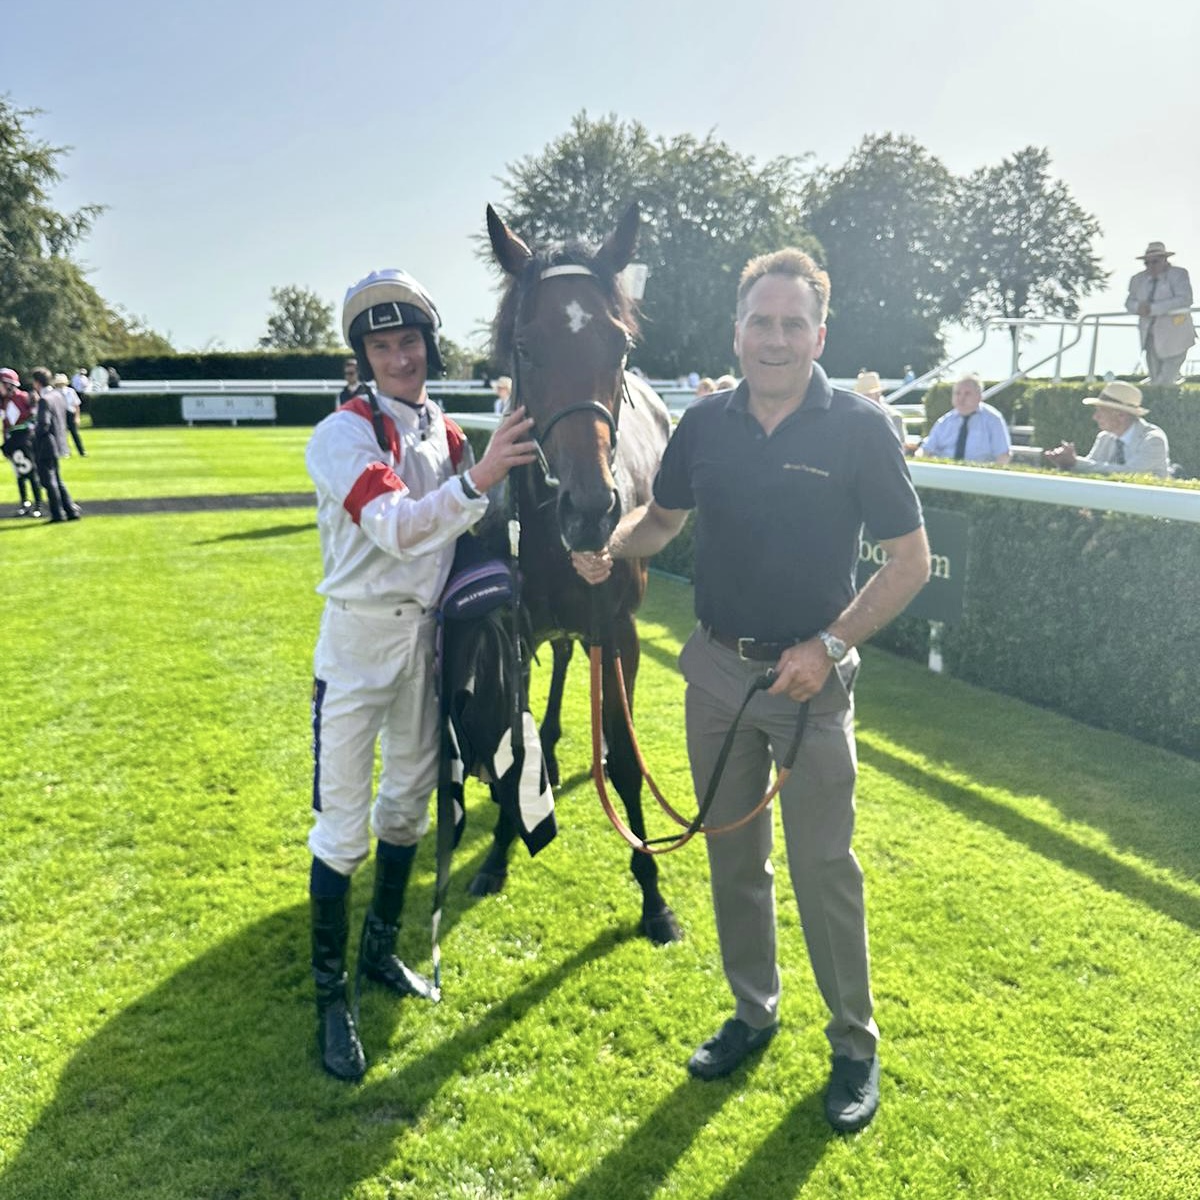 𝐖𝐢𝐧𝐧𝐞𝐫: 𝐍𝐨𝐯𝐞𝐥 𝐋𝐞𝐠𝐞𝐧𝐝 🥇 Congratulations to K K Ho, owner of Novel Legend, who won the Royal Sussex Regiment Handicap @Goodwood_Races this afternoon 🙌🏻 Well done to jockey @D_Muscutttt, groom Andrew, racing manager @mcstayagent and all the team at Pegasus!